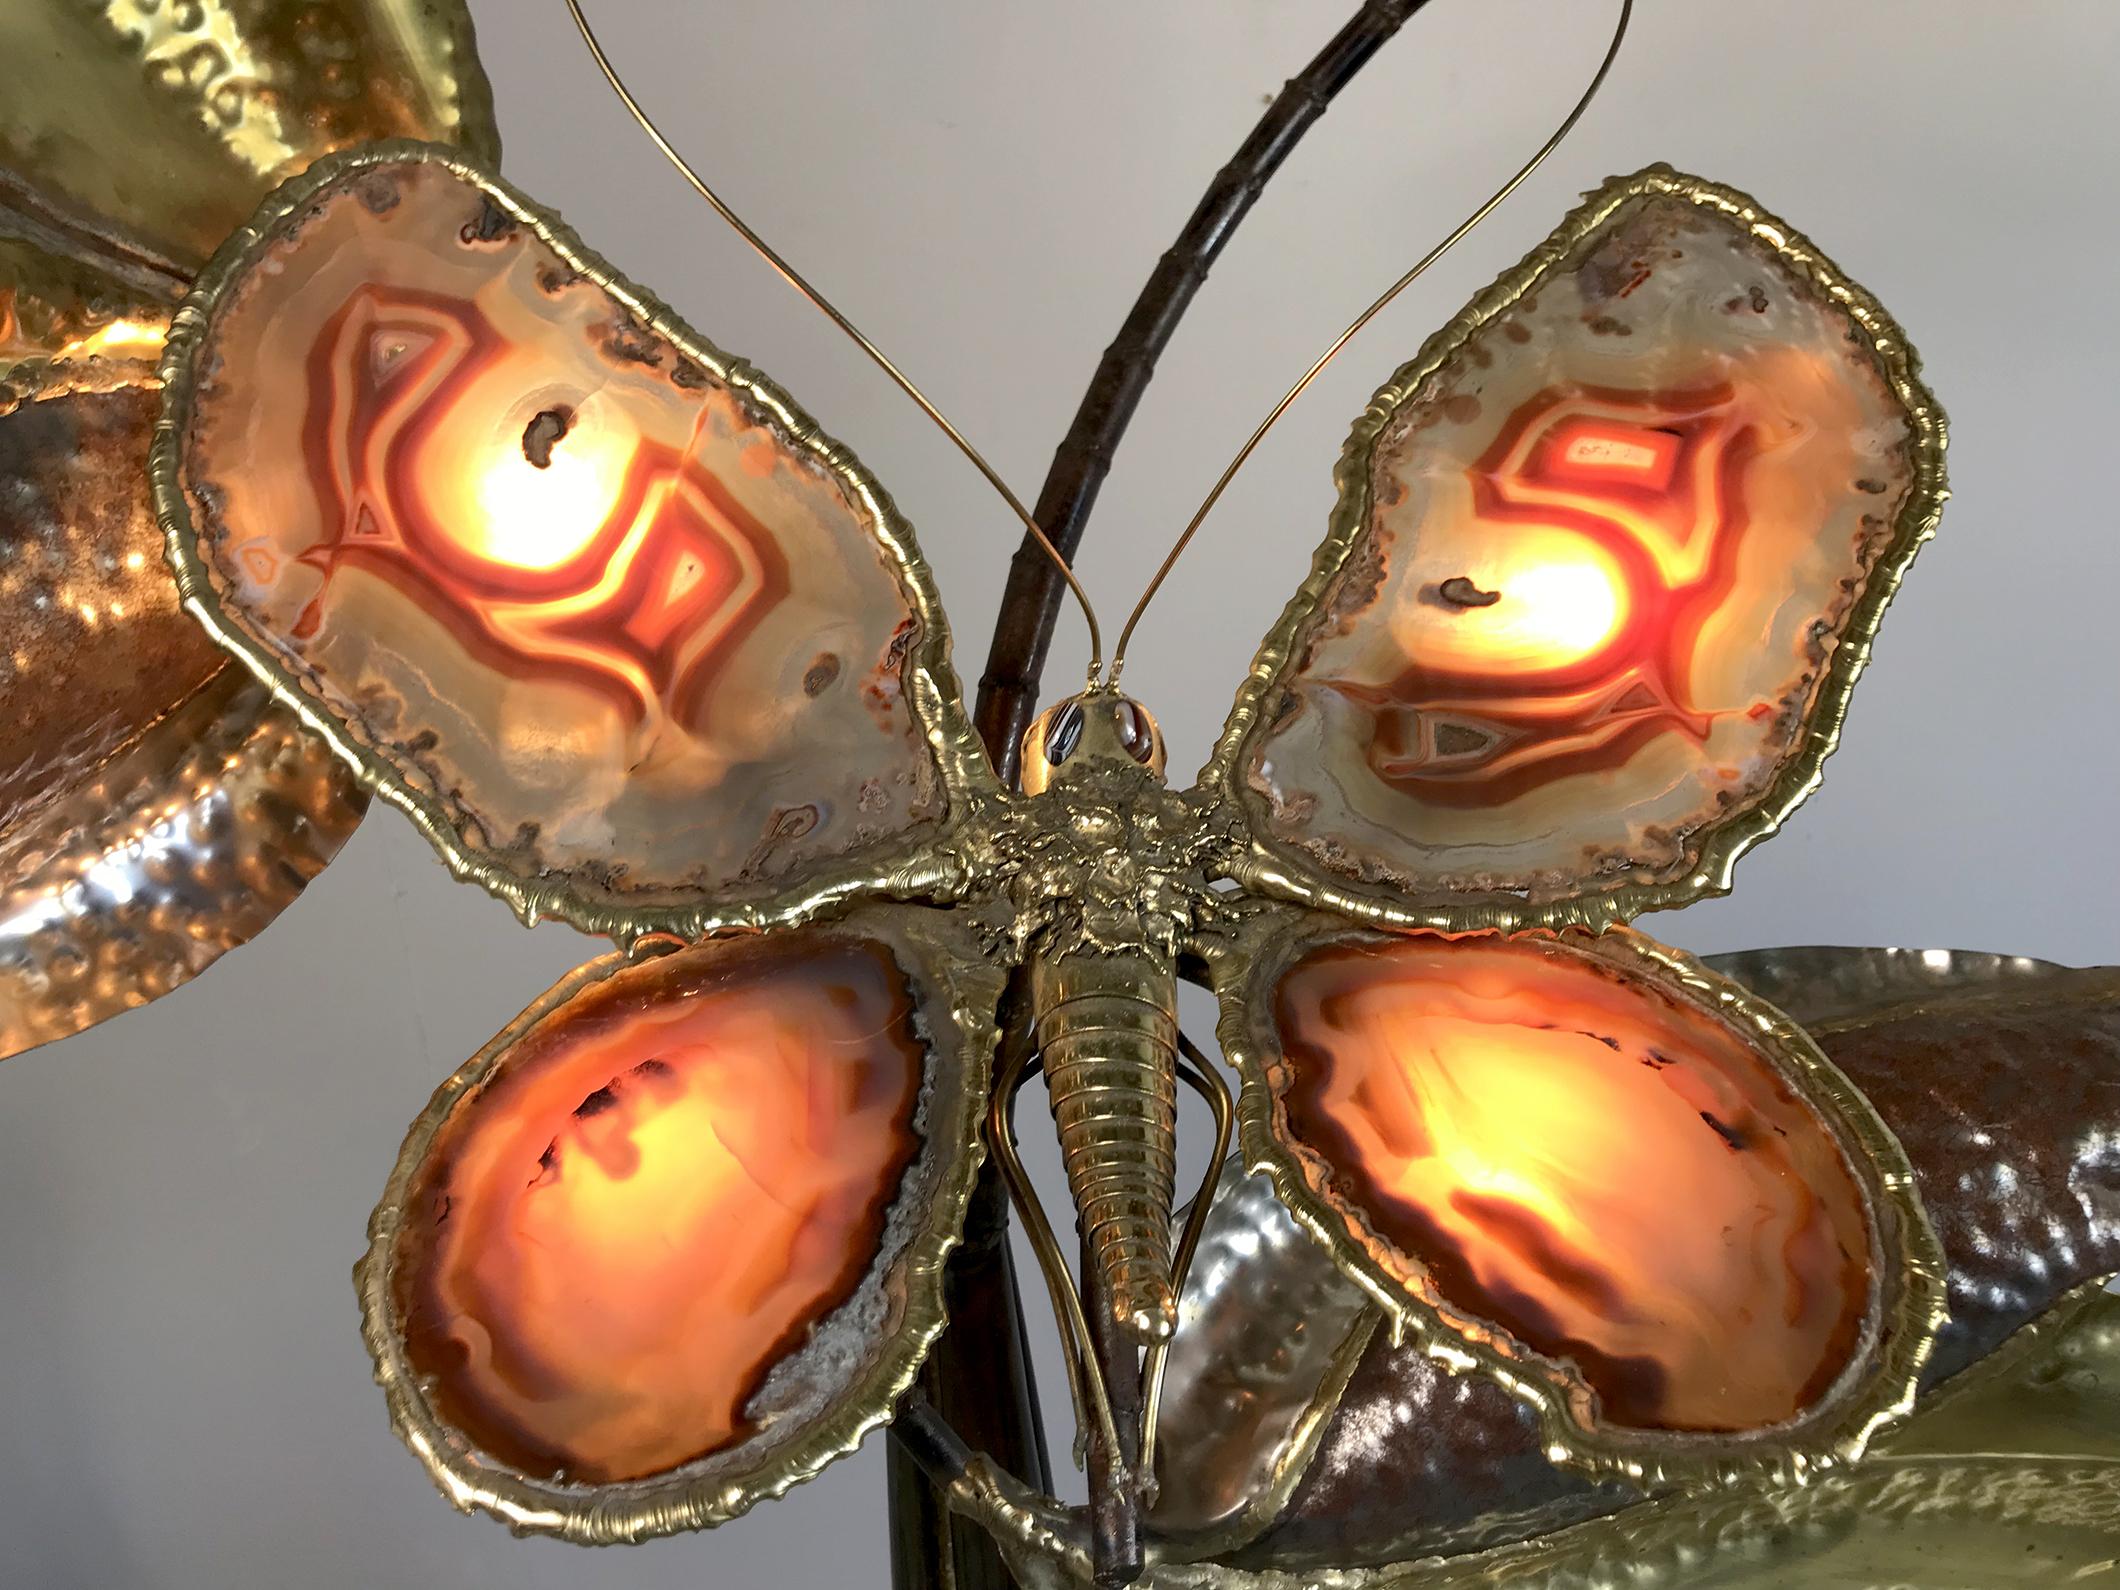 Isabelle and Richard Faure, Large light sculpture for the Maison Honoré, France 1980. Alternating brass, patinated metal and slices of red veined agates, this Butterfly Tree has 7 lights.
Signed 